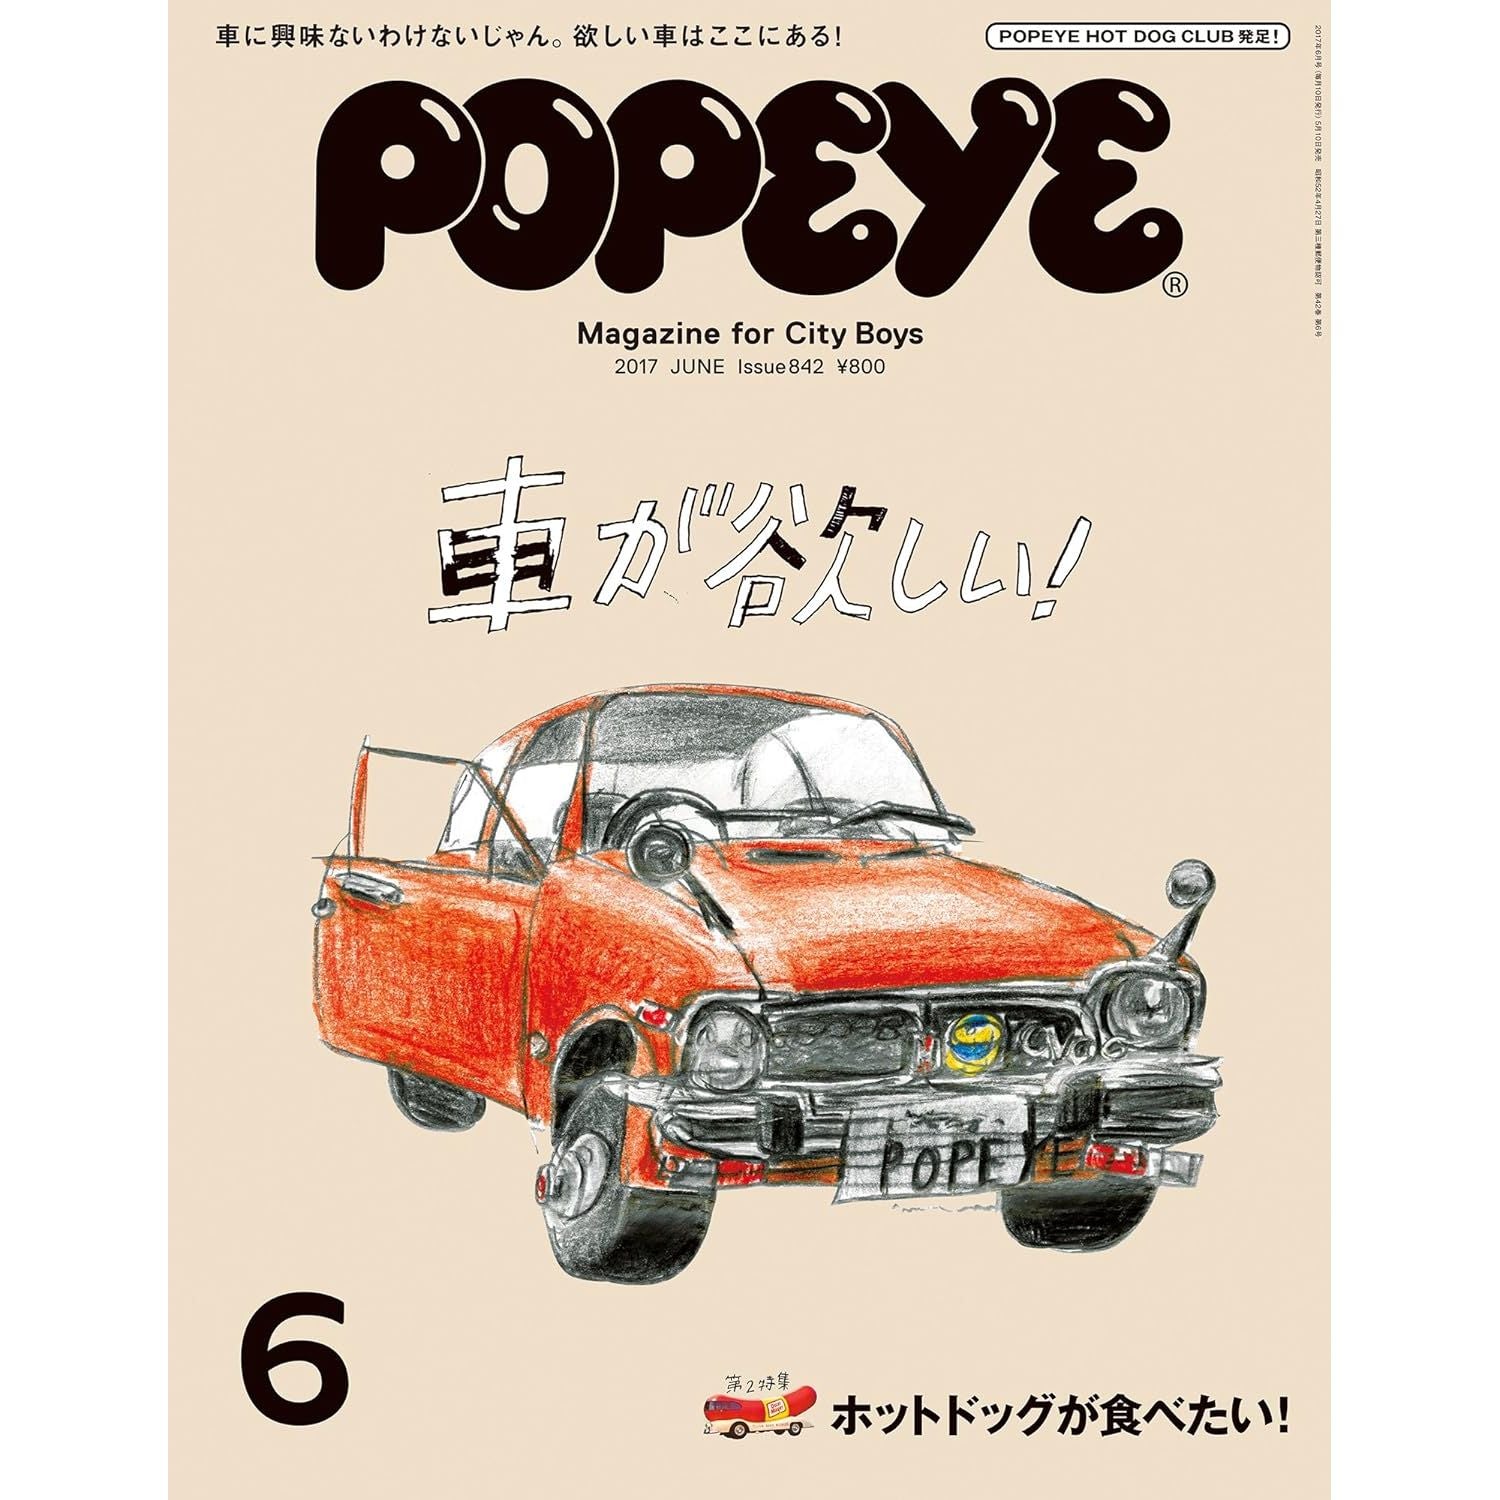 Popeye Car And Hot Dog Issue